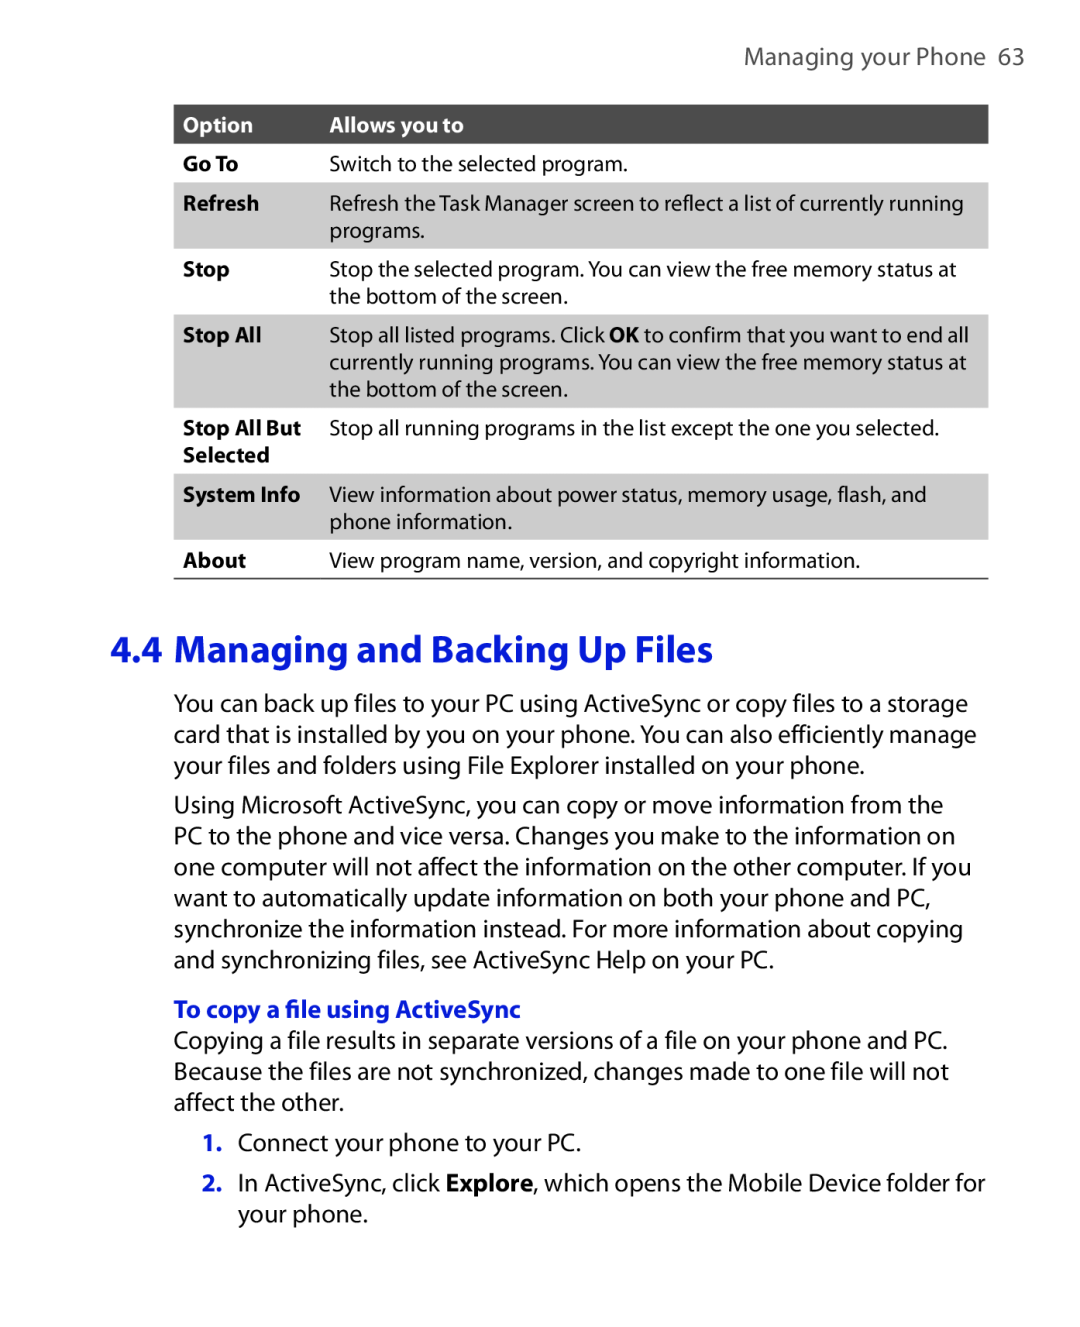 HTC HTC S621 user manual Managing and Backing Up Files, To copy a ﬁle using ActiveSync 